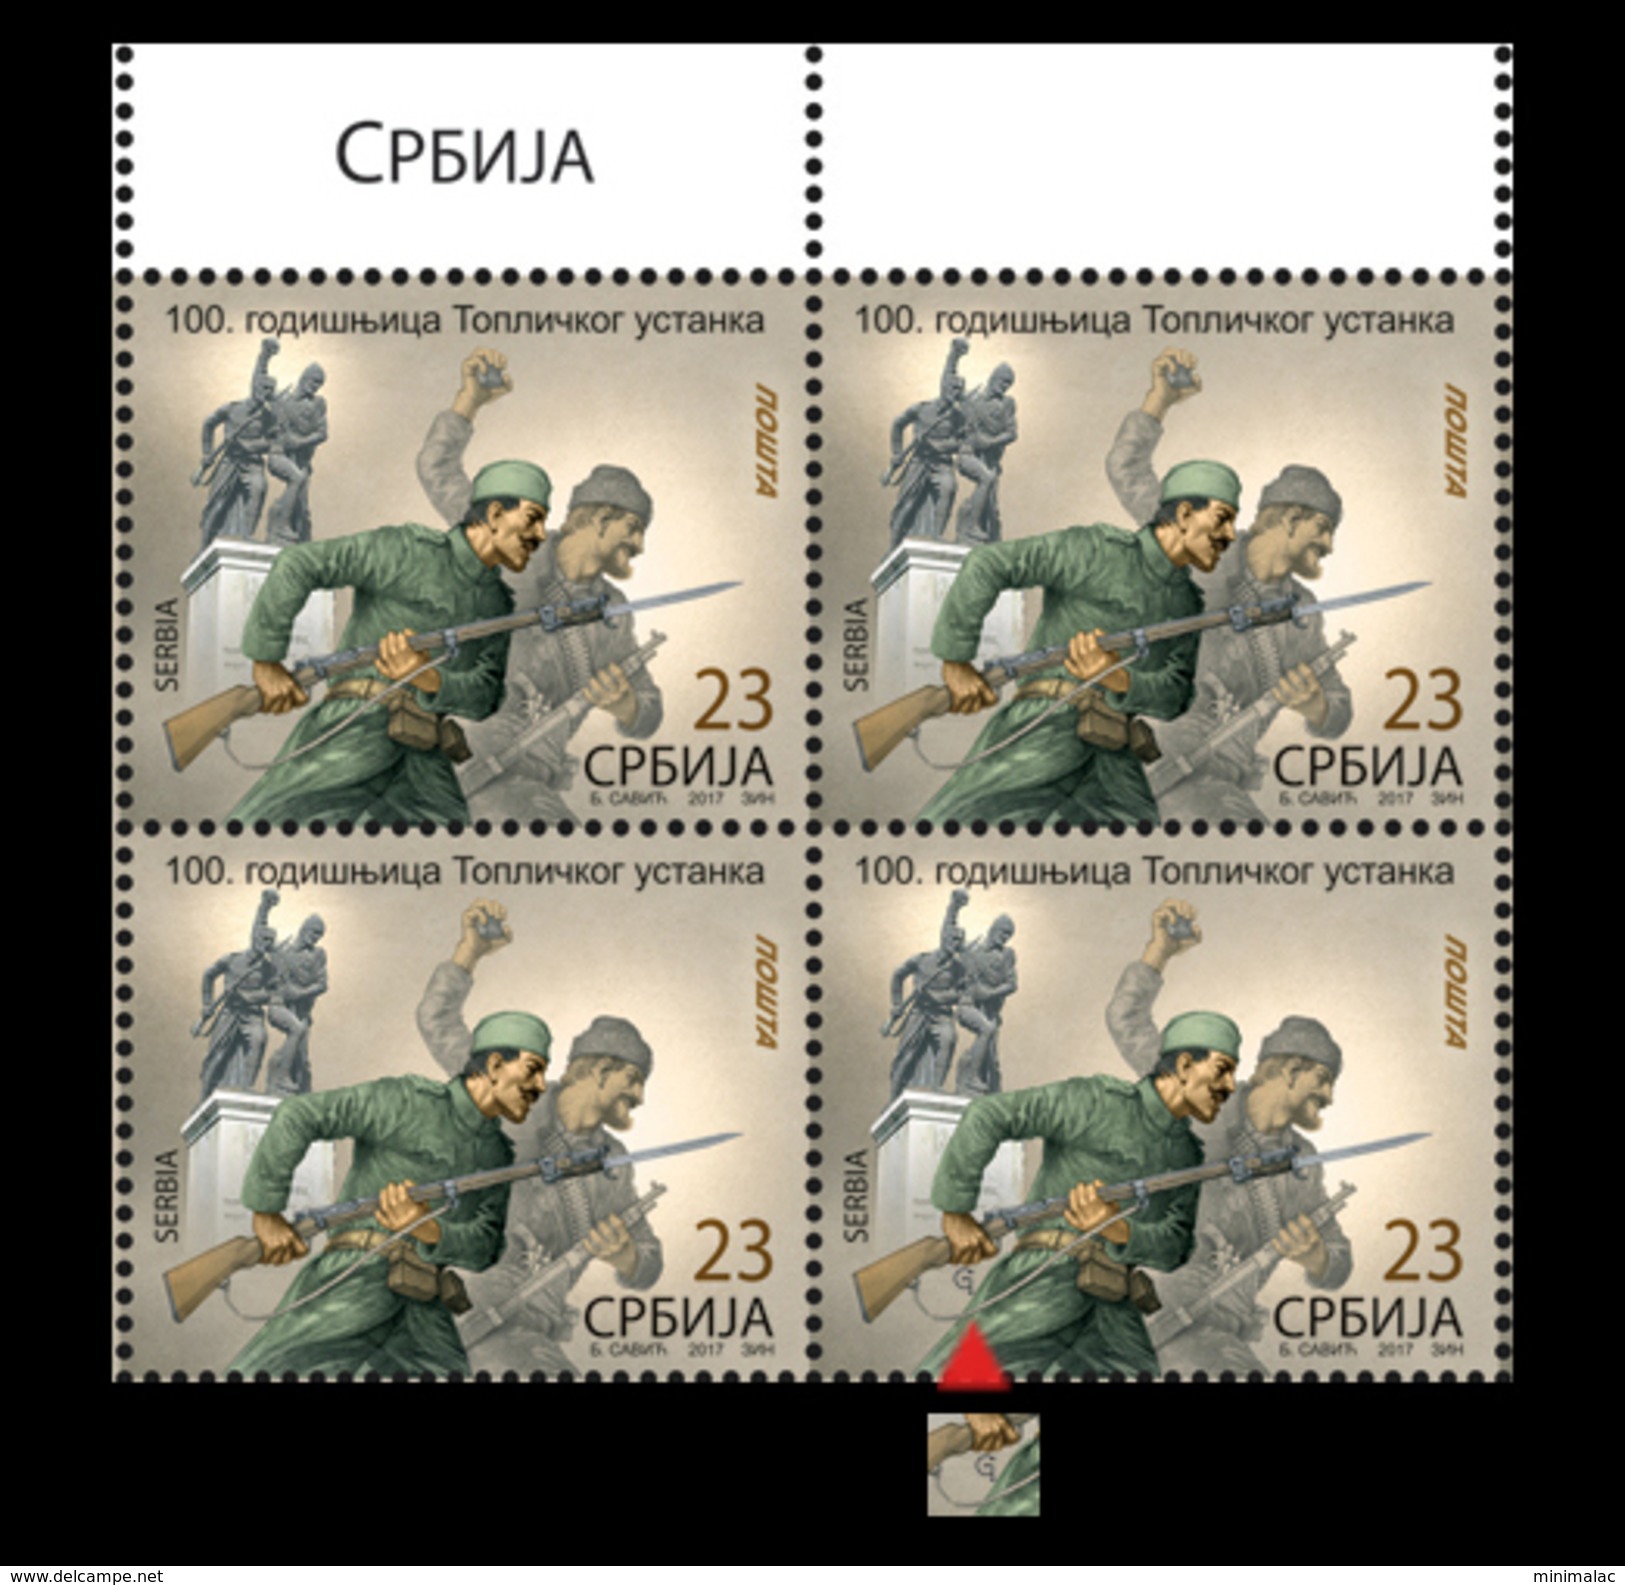 Serbia 2017 100th Anniversary Of Toplica Uprising, WWI, Engraver, Soldier, Gun, Monument, Weapon, Block Of 4 MNH - Militaria